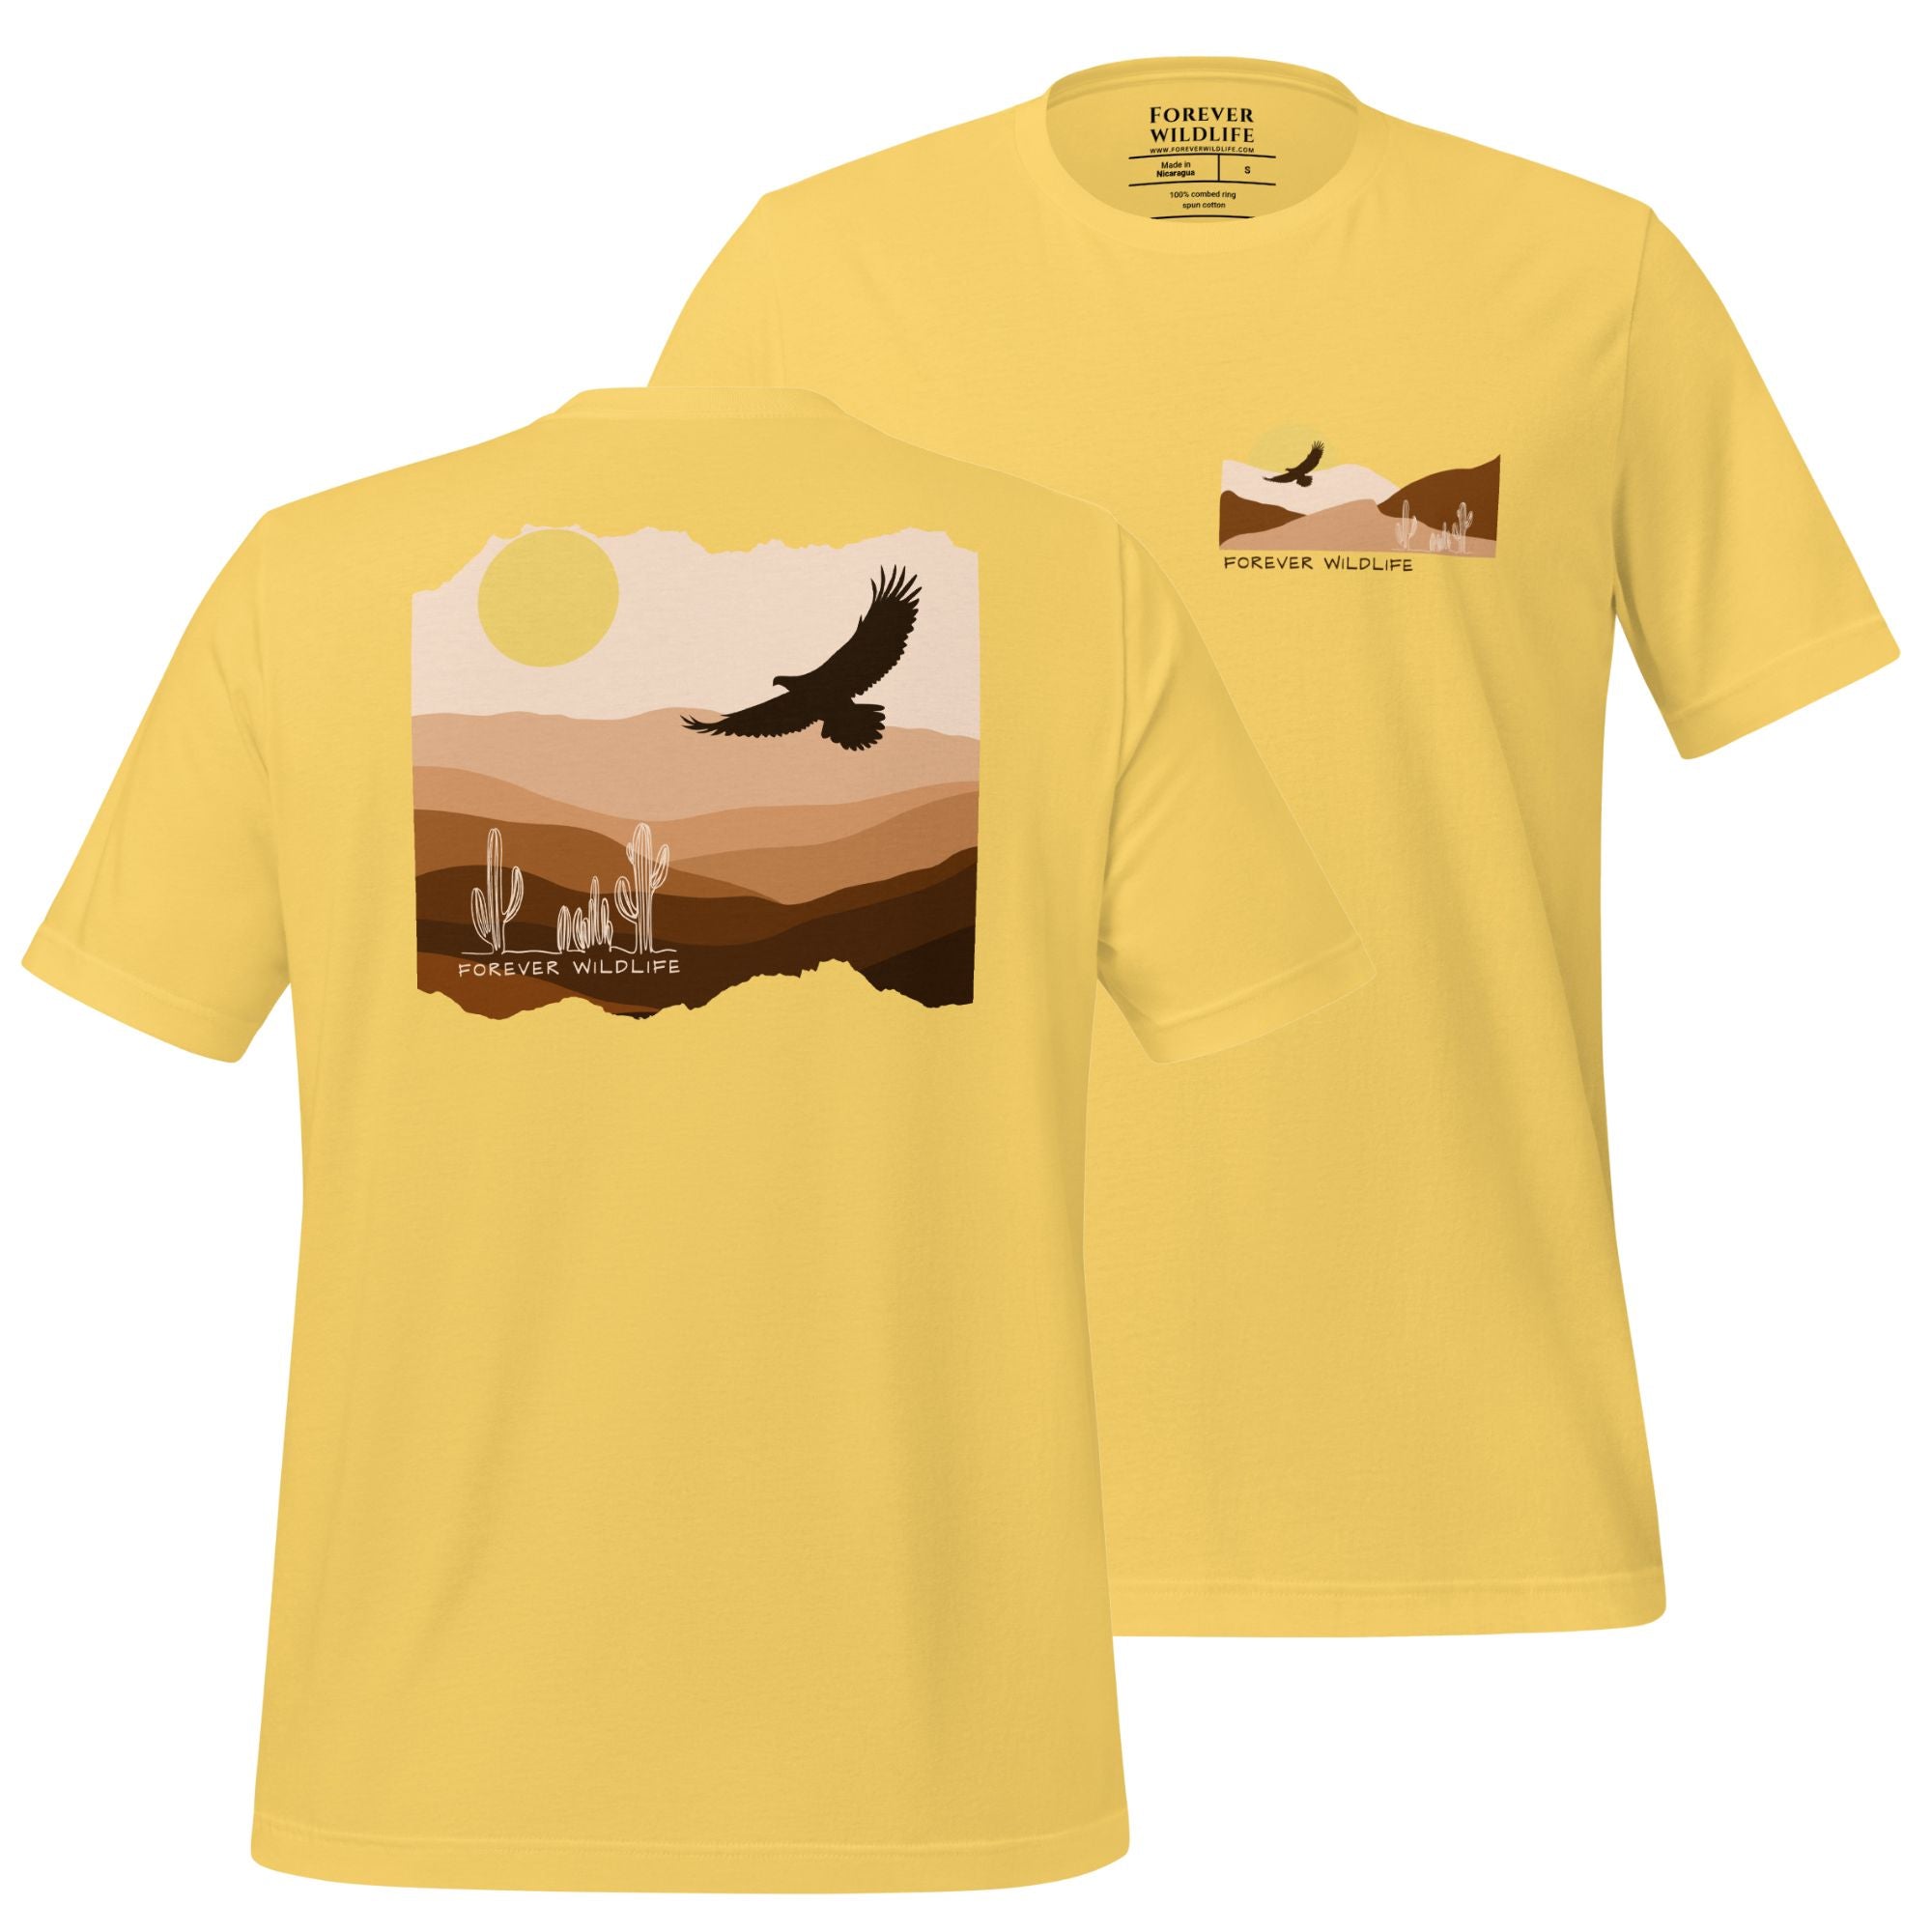 Eagle T-shirt, beautiful yellow Eagle t-shirt with eagle soaring over the desert part of Wildlife t shirts & Clothing collection.